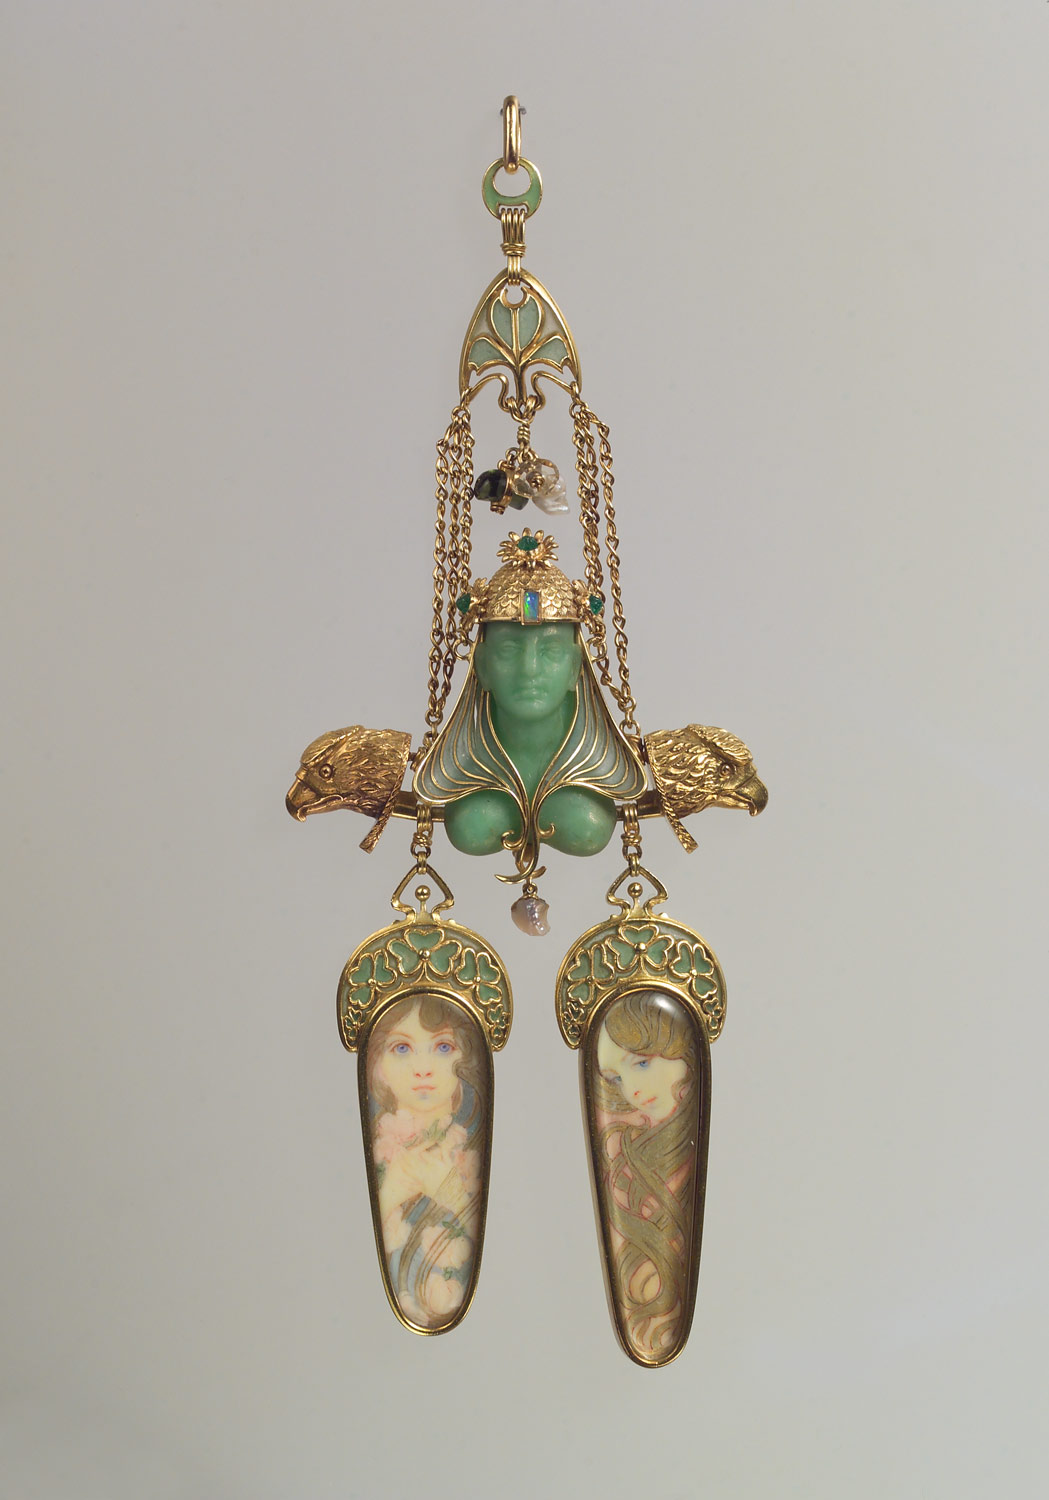 Gold, enamel, and mother-of-pearl pendant with Opal, Emerald, and coloured stones 